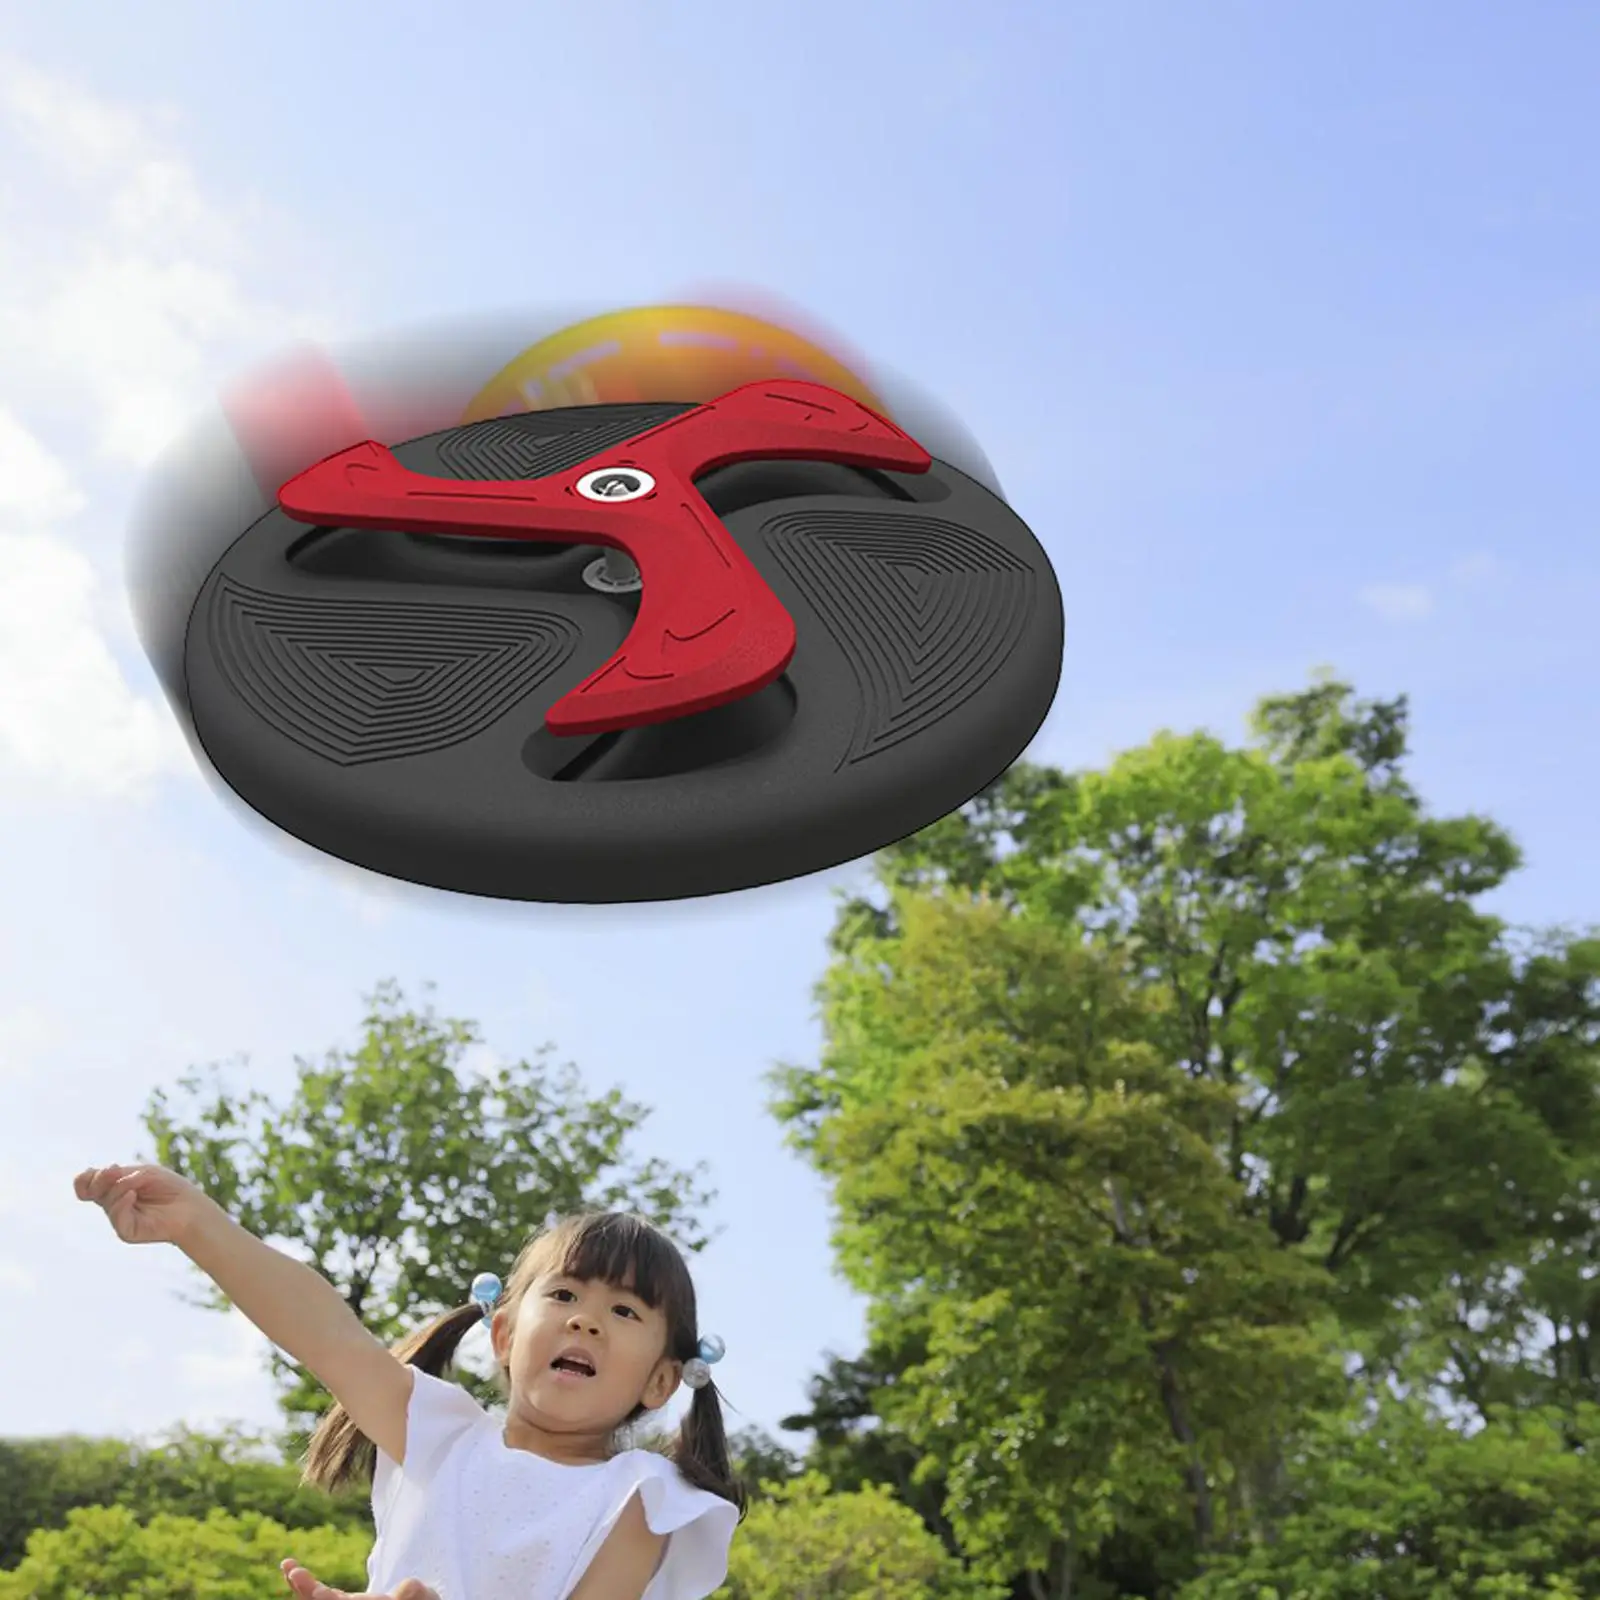 Kids Soft Flying Discs Removable Portable Throwing for Family Party Outdoor